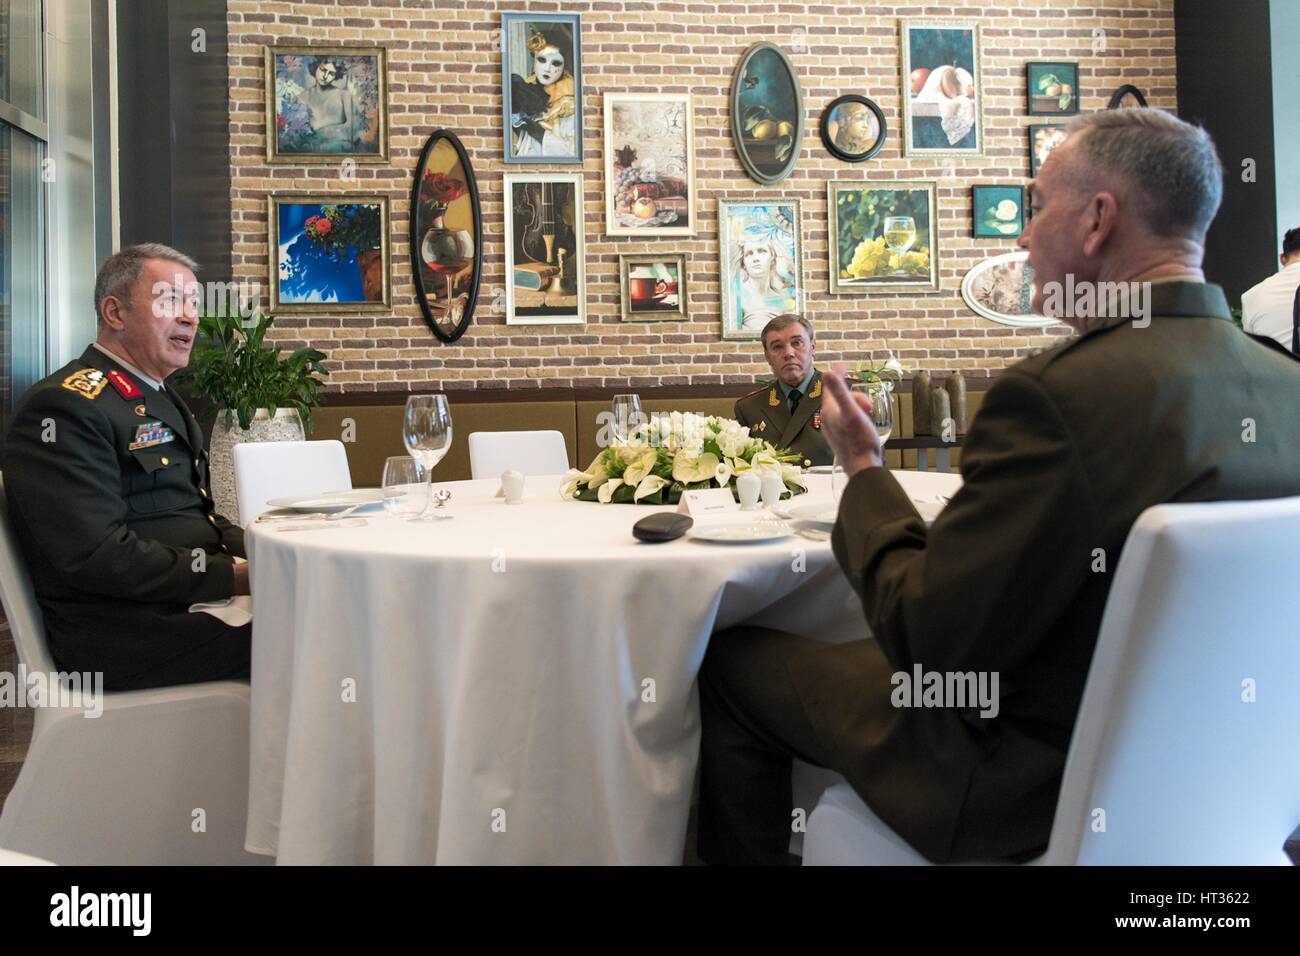 Antalya, Turkey. 7th Mar, 2017. U.S. Joint Chiefs Chairman Gen. Joseph Dunford, right, with Turkish Gen. Hulusi Akar and Russian Gen. Valery Gerasimov, center, during a working lunch March 7, 2017 in Antalya, Turkey. The three chiefs of defense are meeting to discuss operations in Syria. Credit: Planetpix/Alamy Live News Stock Photo